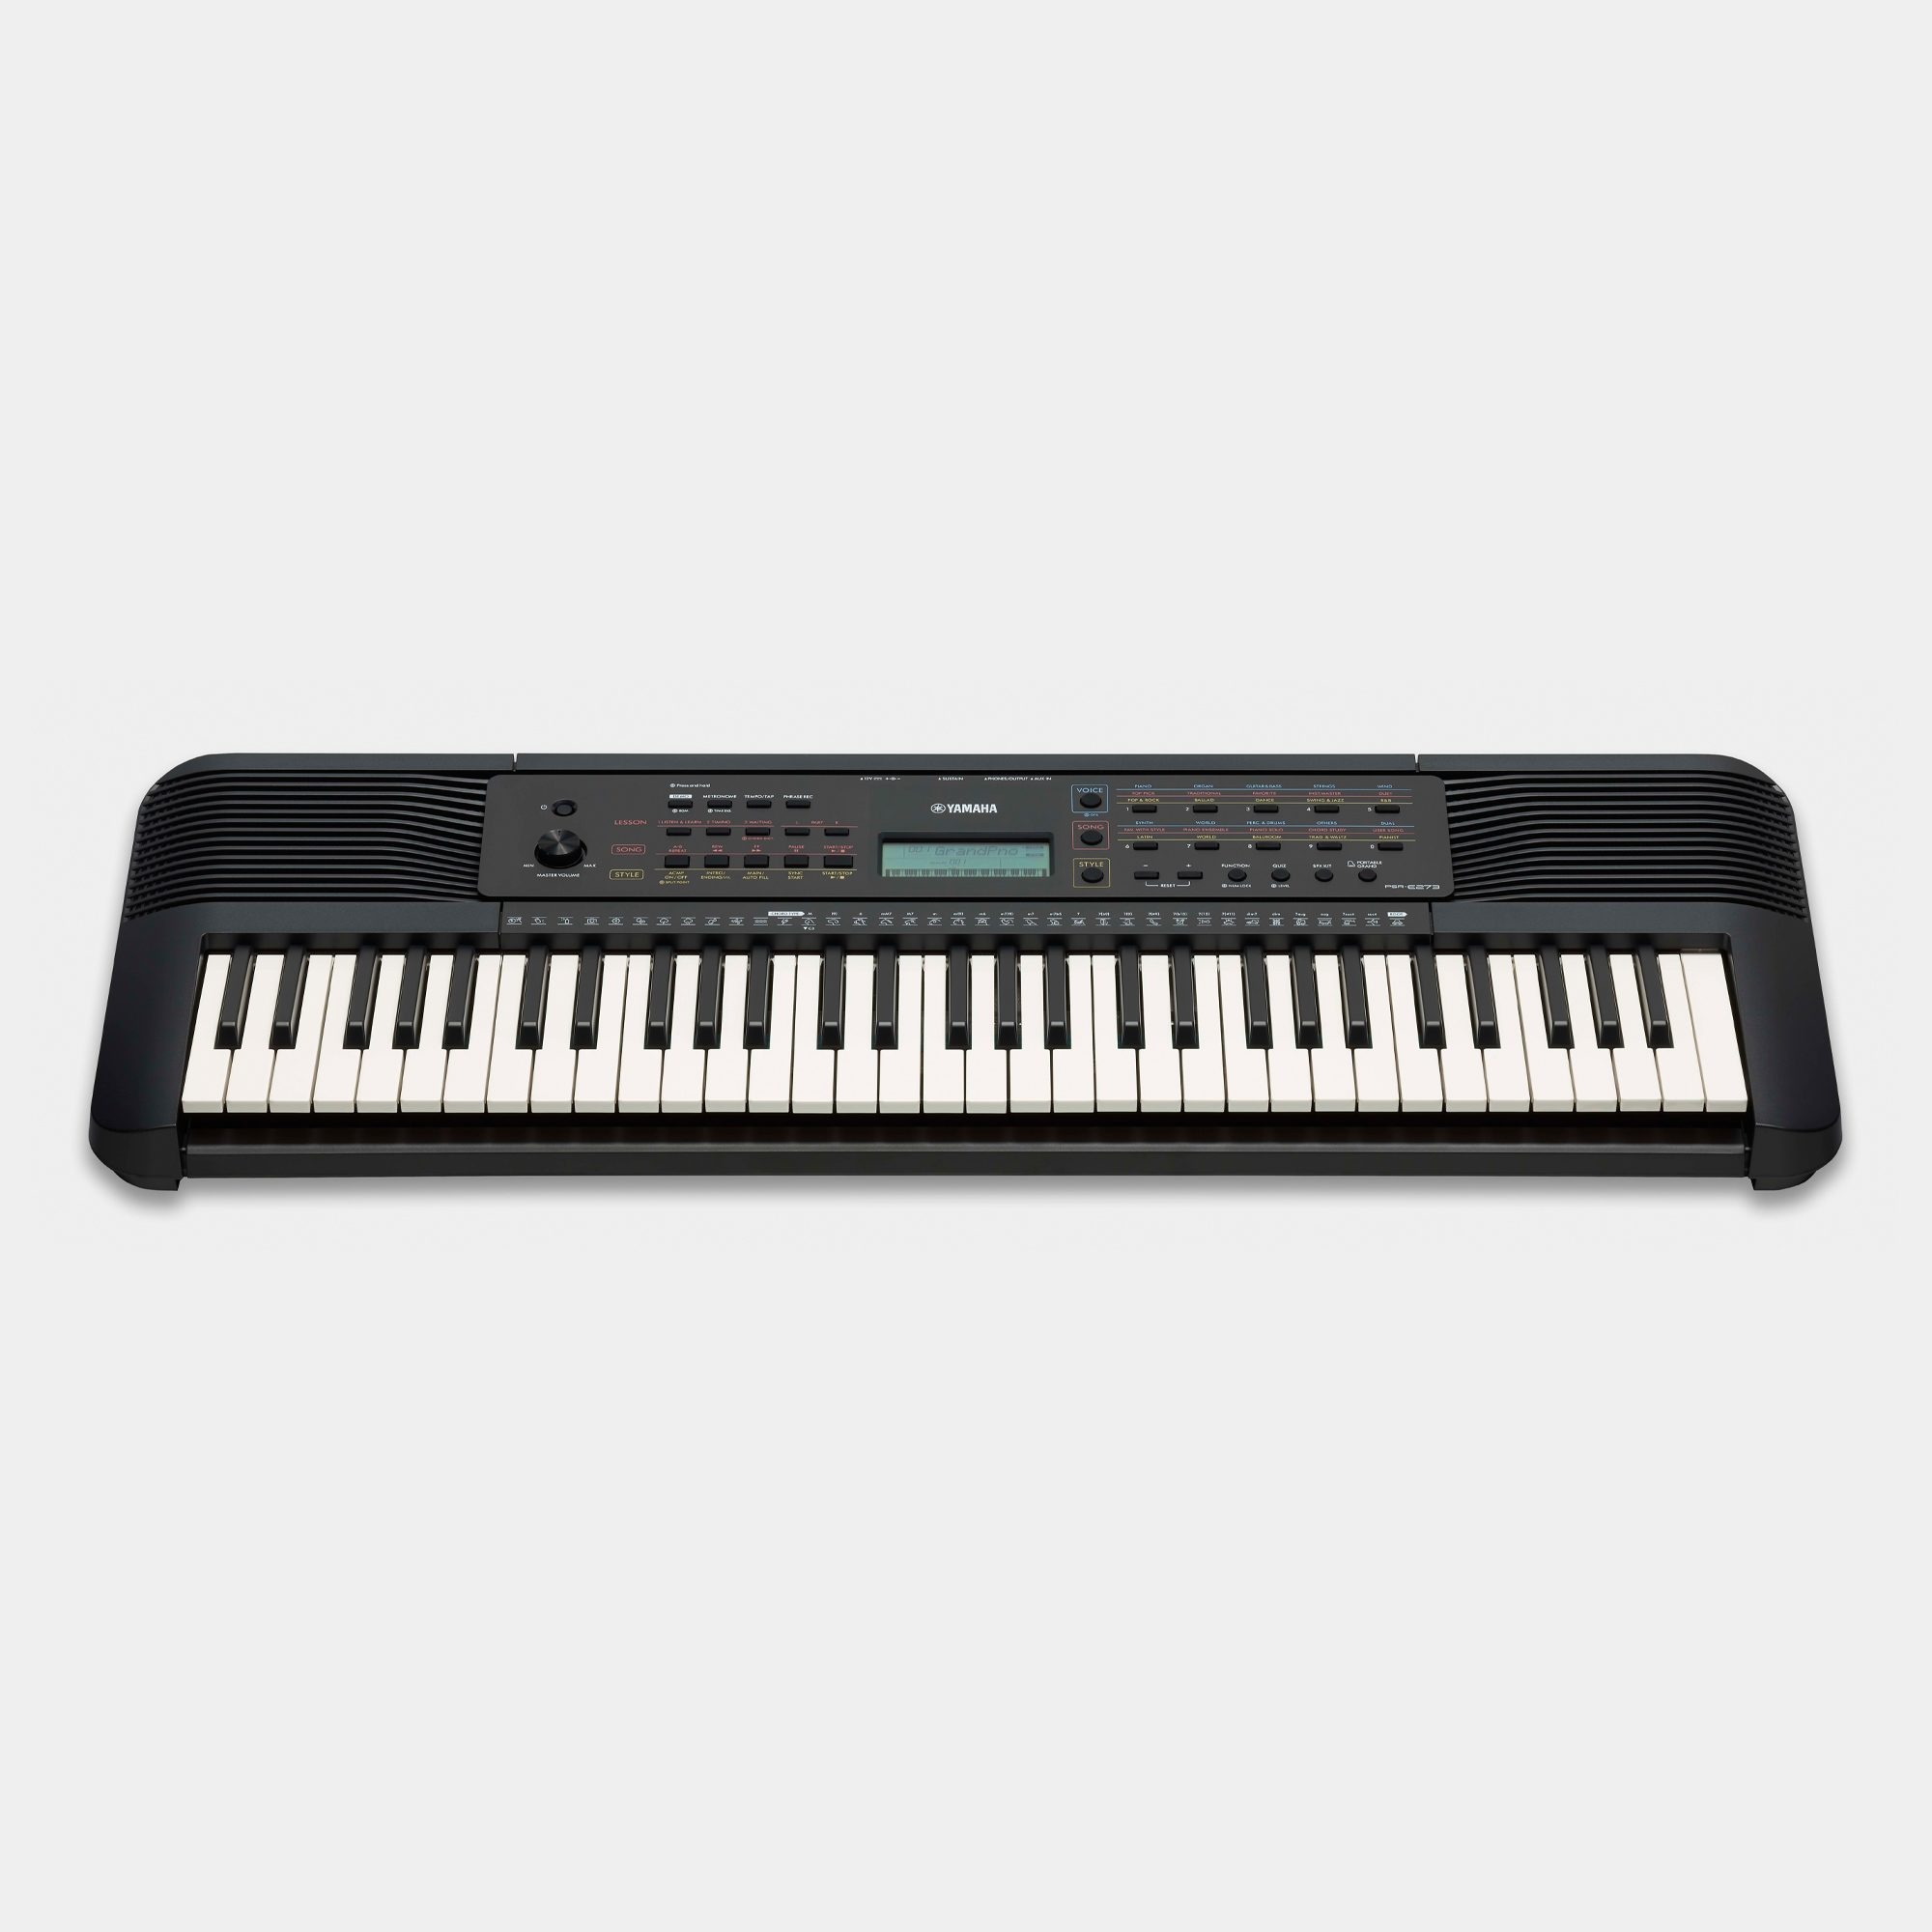 PSR-E273 - Overview - Portable Keyboards - Keyboard Instruments 